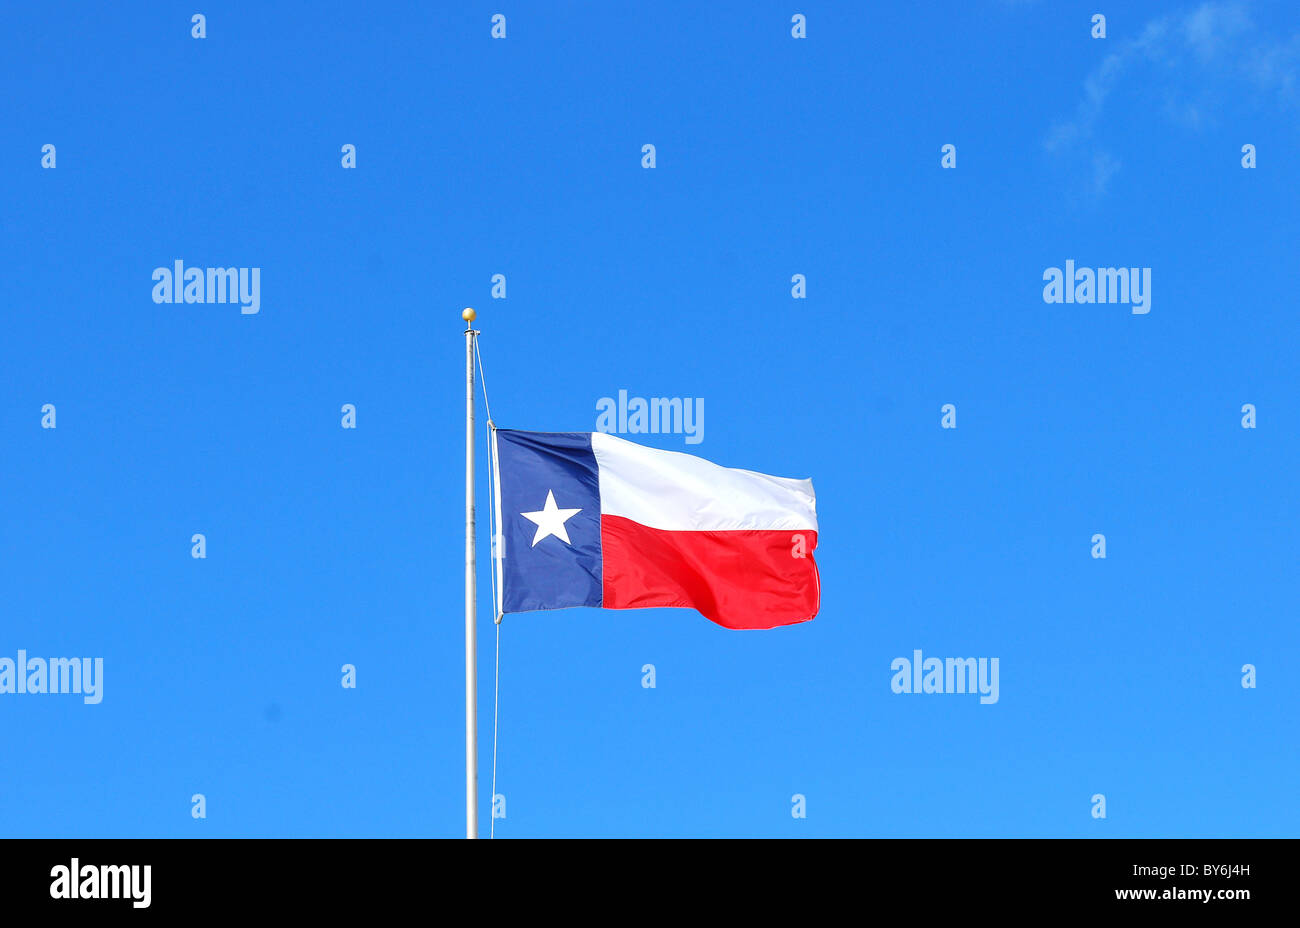 Texas flag flying high in the skies. Stock Photo